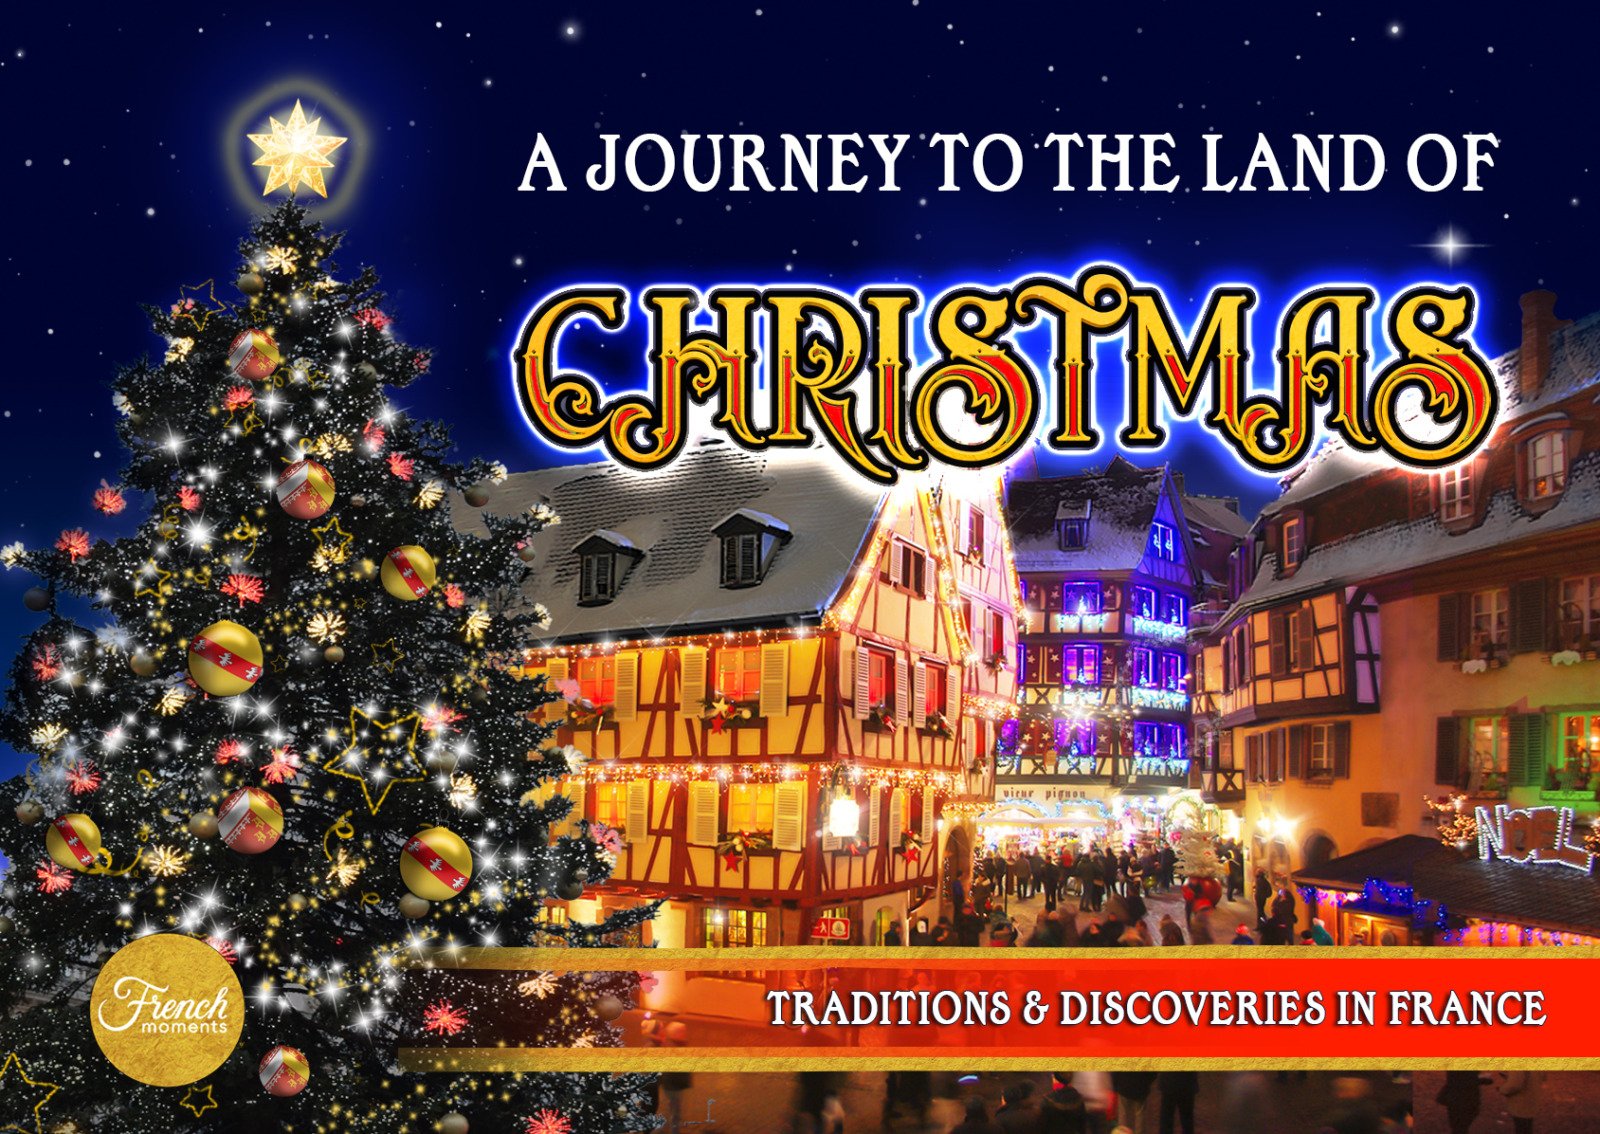 A Journey to the Land of Christmas by French Moments